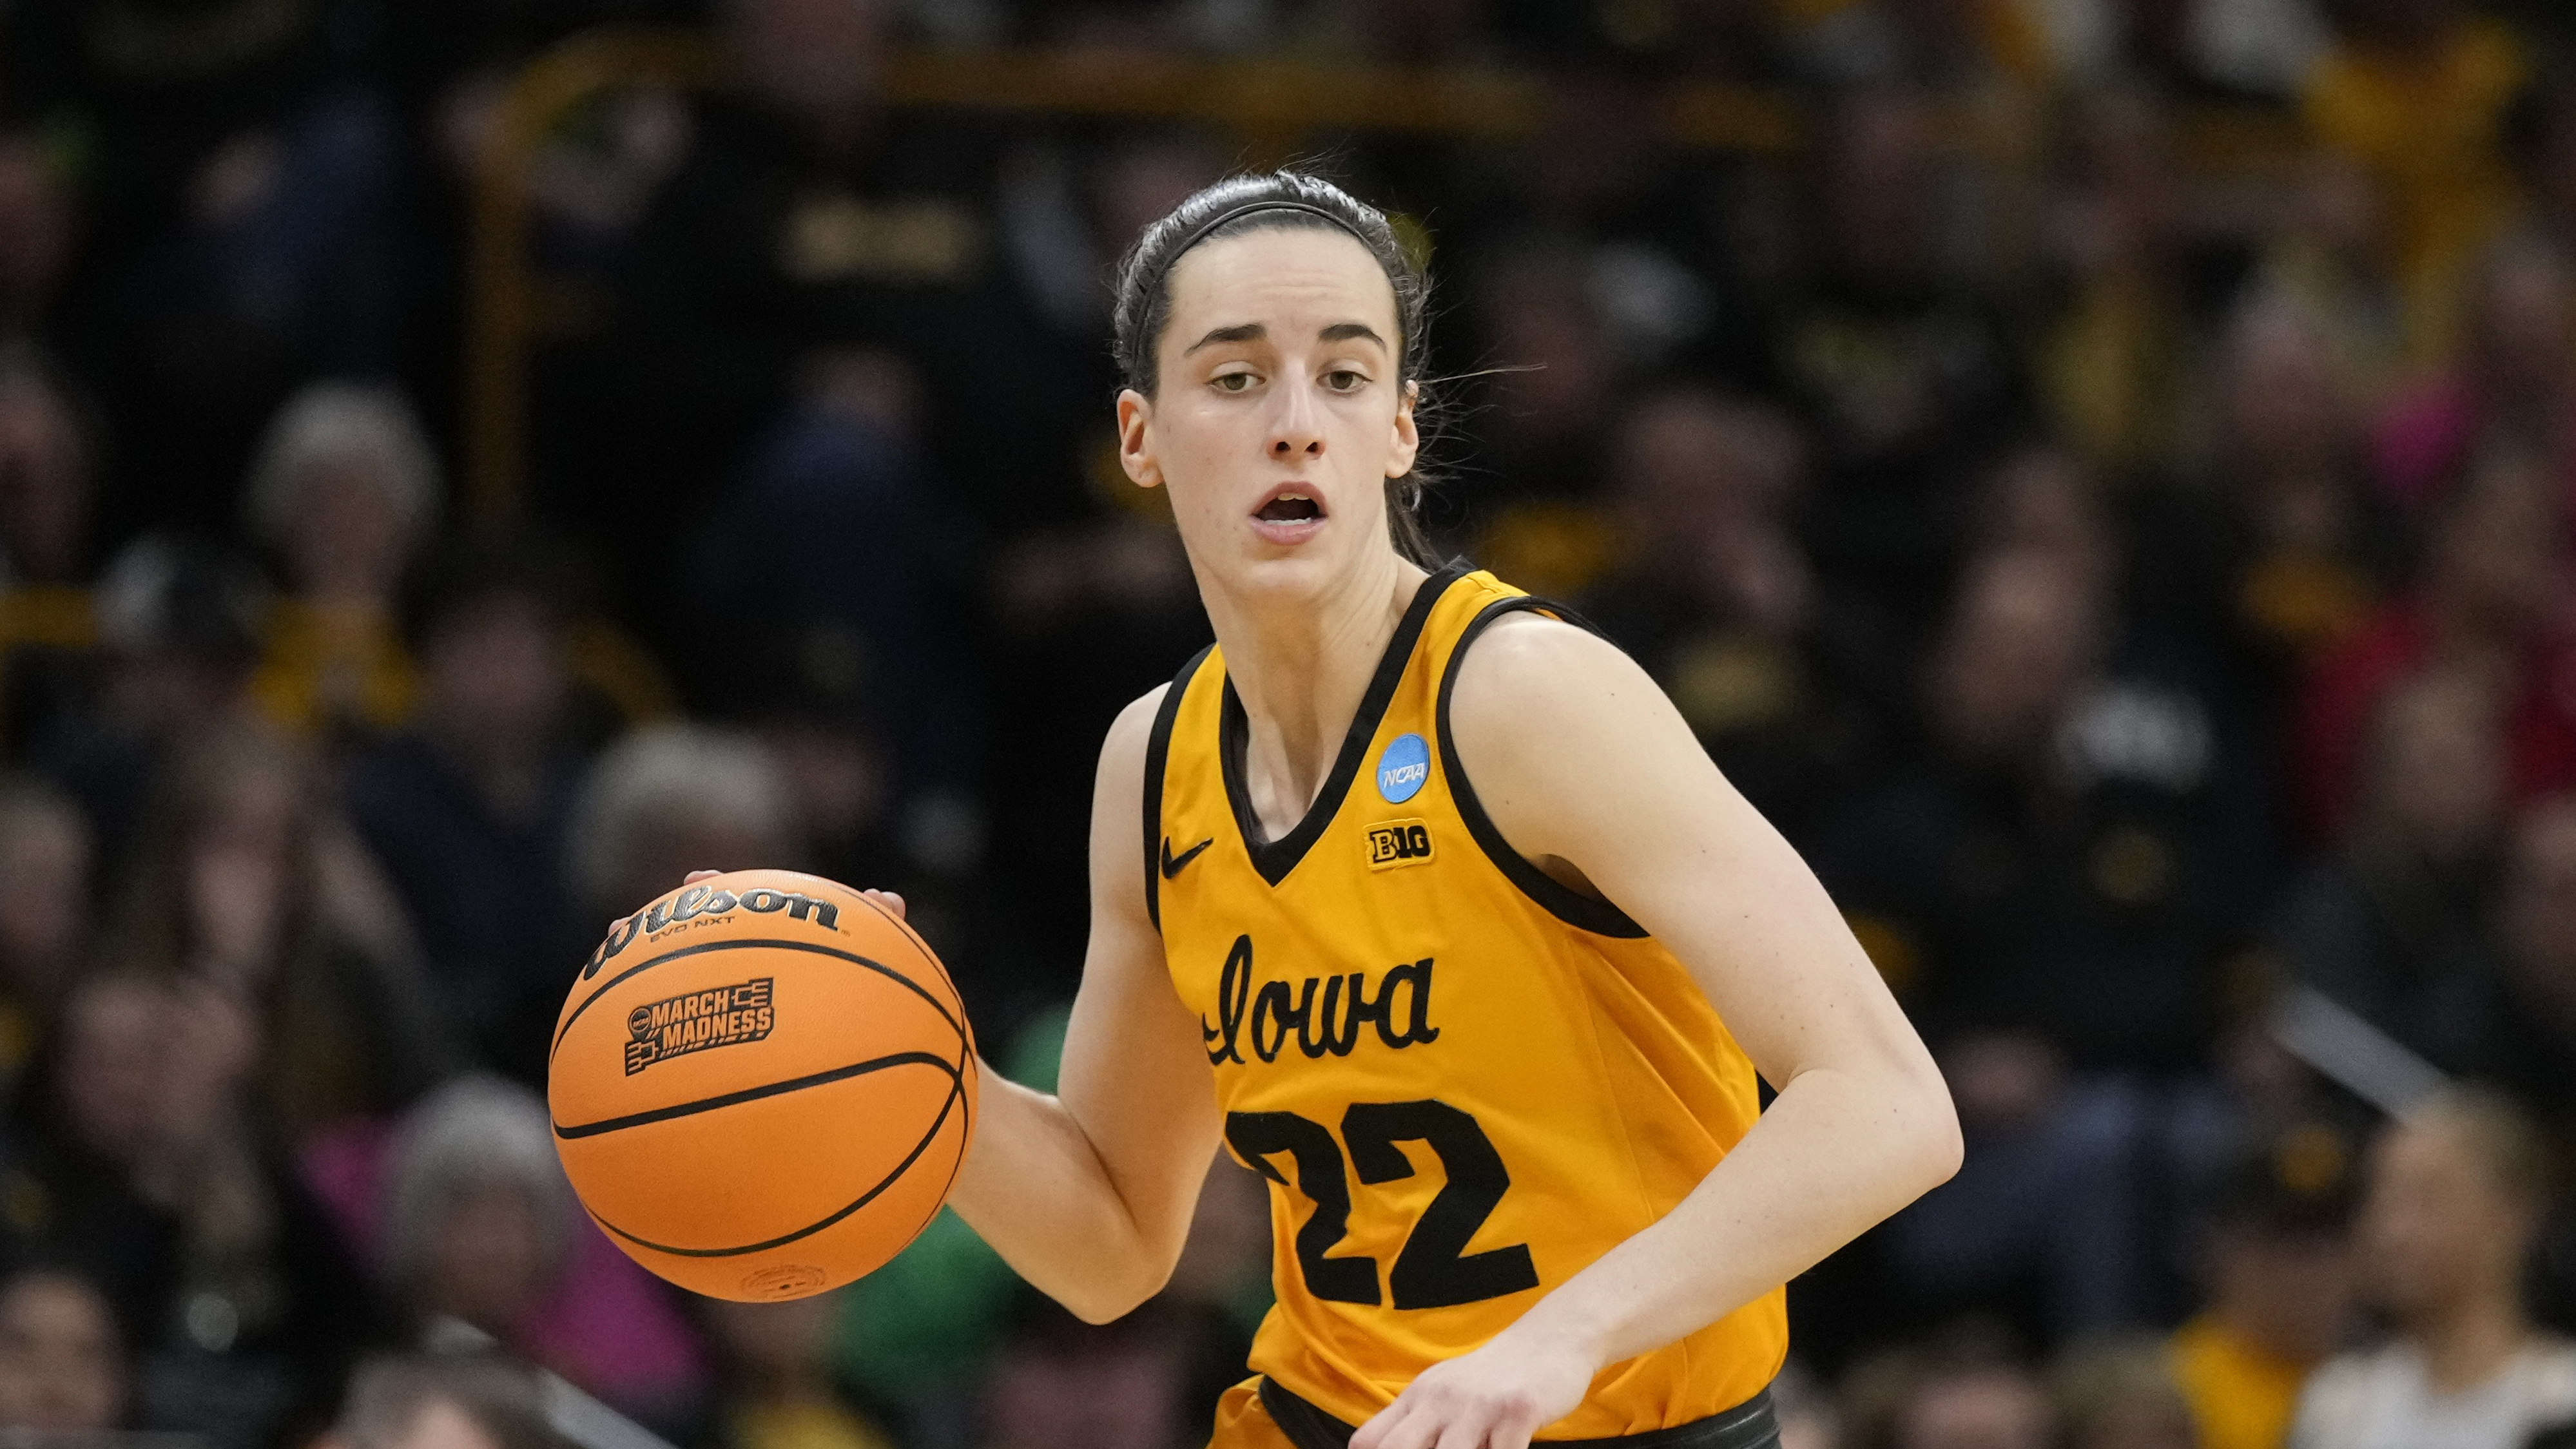 Iowa vs Colorado NCAA womens basketball free live stream, odds, TV channel for Sweet 16 game (3/24/2023)